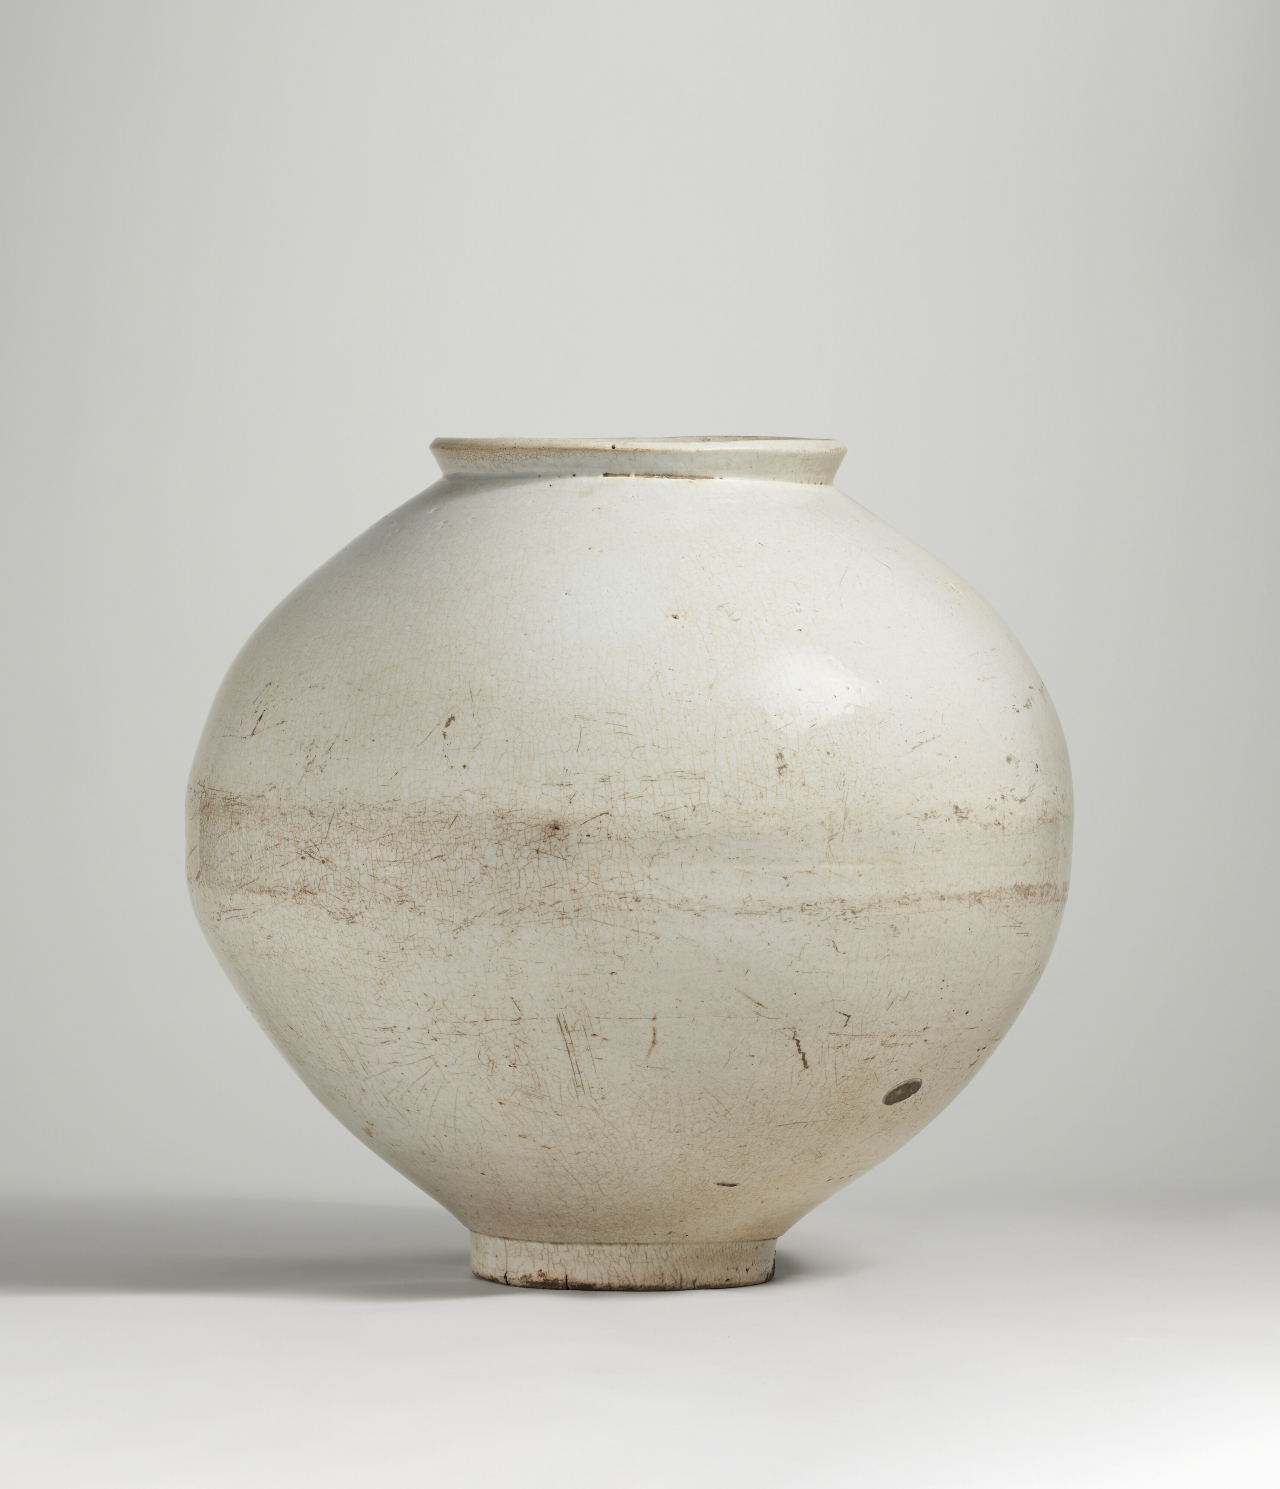 A white porcelain moon jar from the 18th century (Christie's)